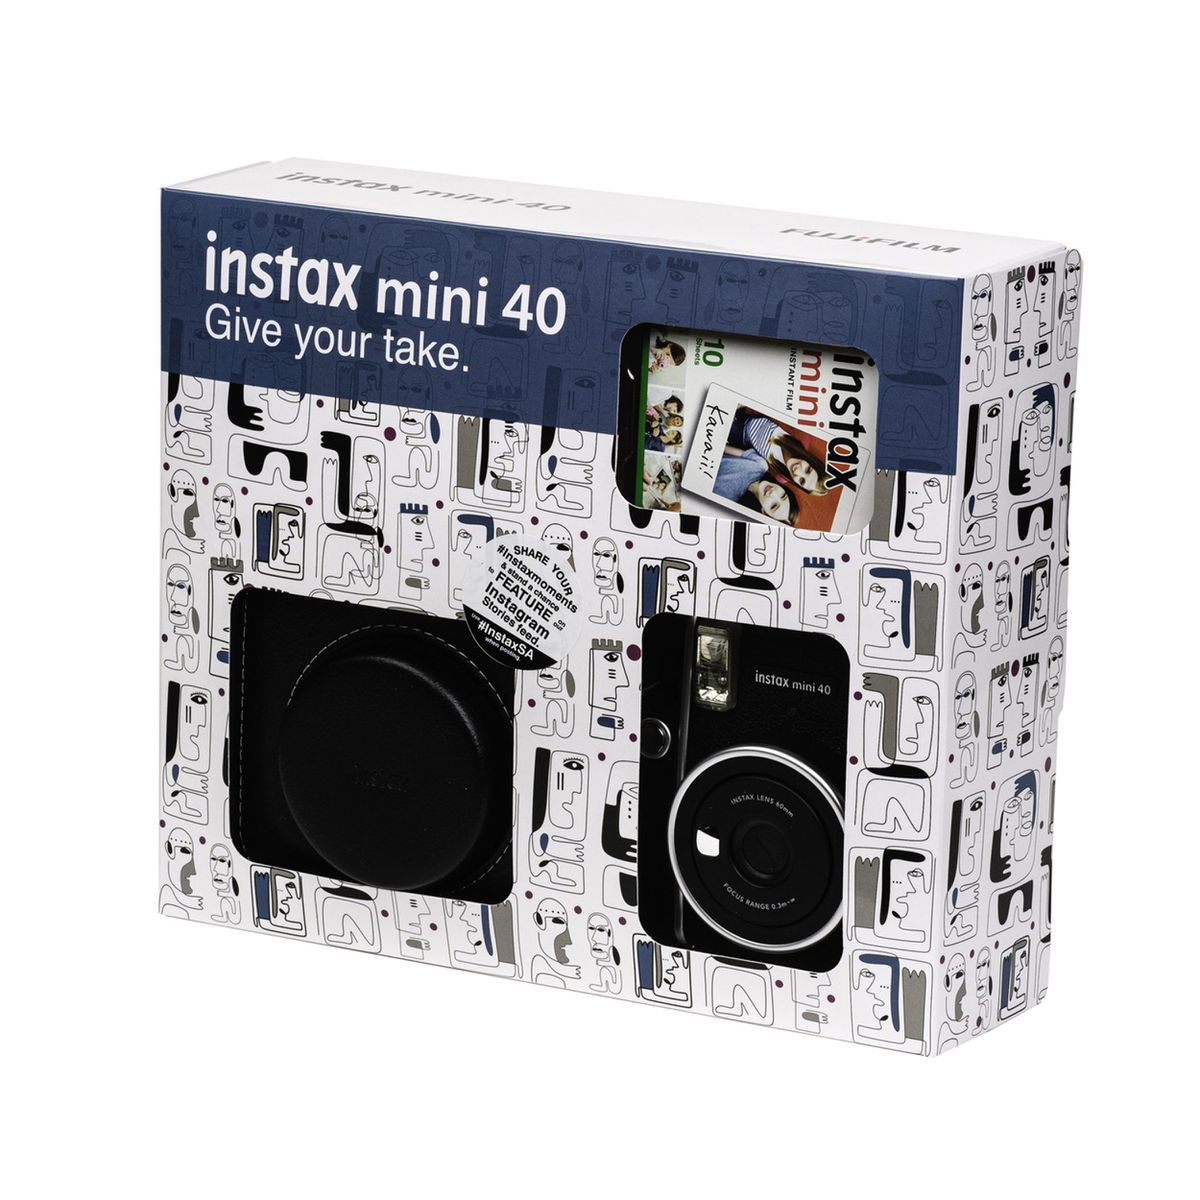 Instax mini 40 Camera Kit with Film and Bag